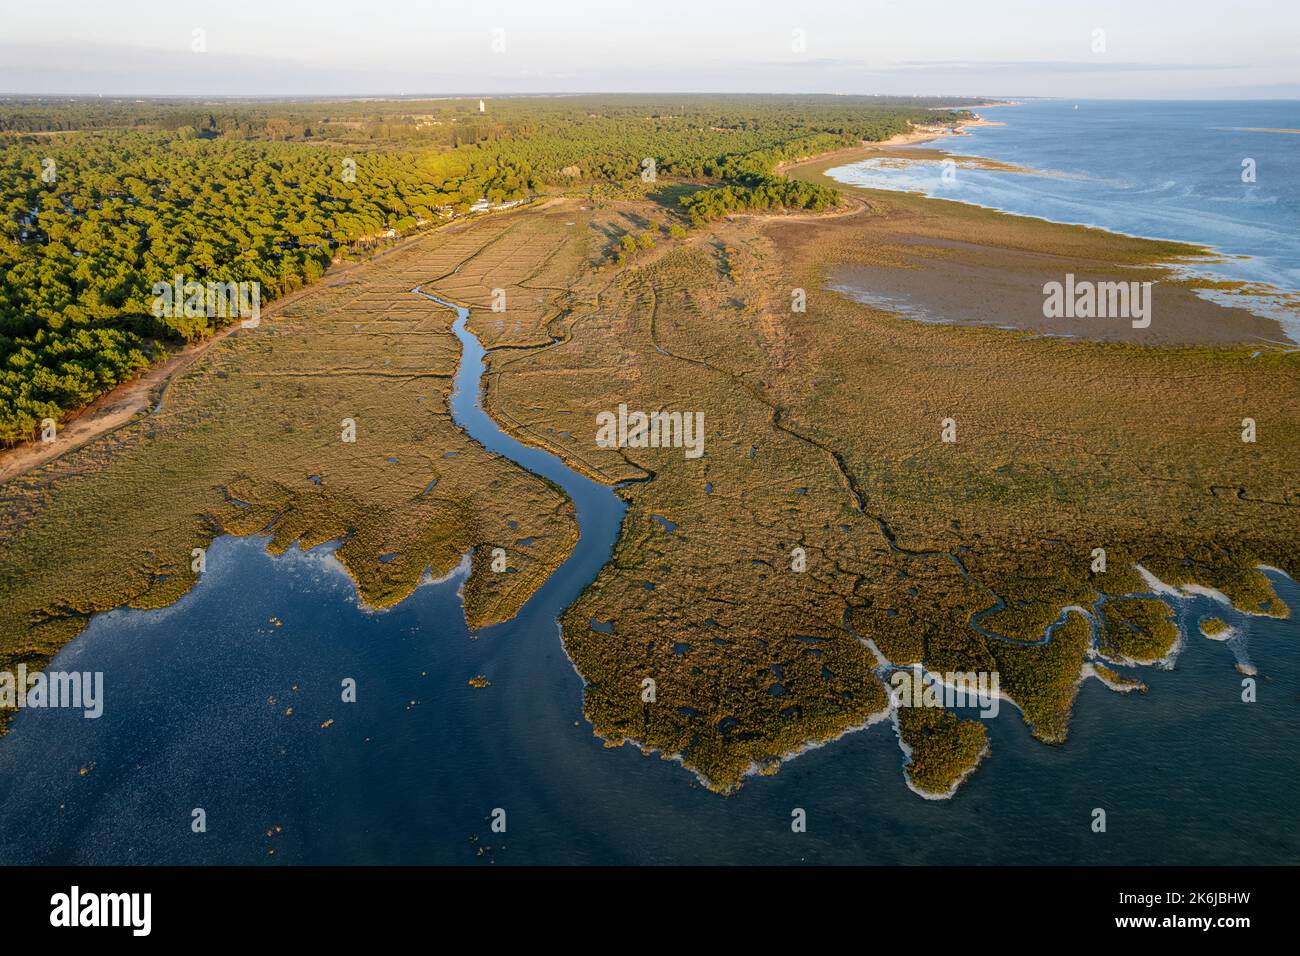 Aerial view of the Bonne Anse bay at low tide, La Coubre point, France Stock Photo